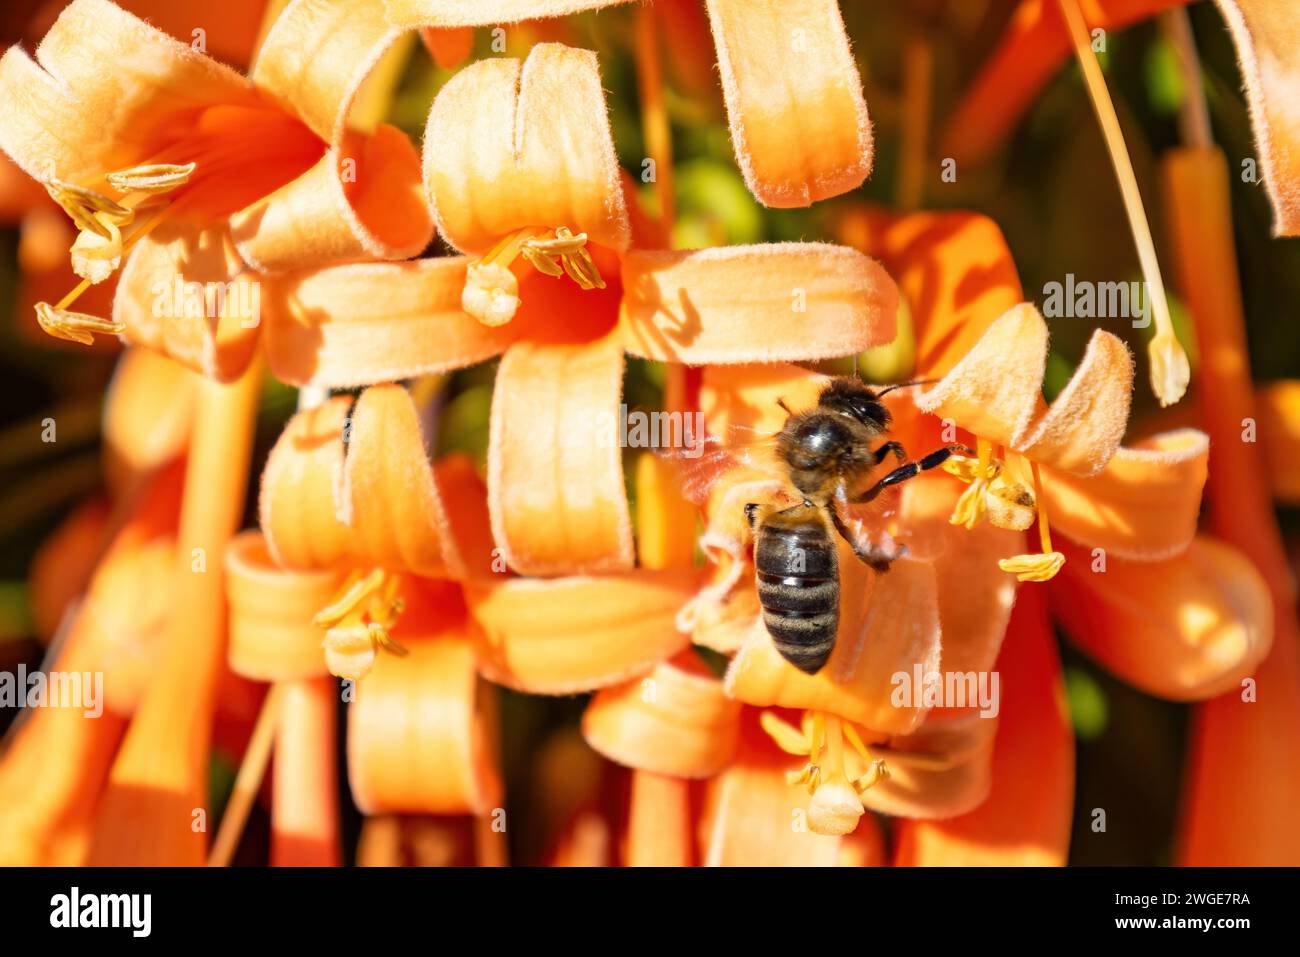 A western honey bee or European honey bee (Apis mellifera) is polinizing and collecting nectar from a pyrostegia venusta, also commonly known as flame Stock Photo